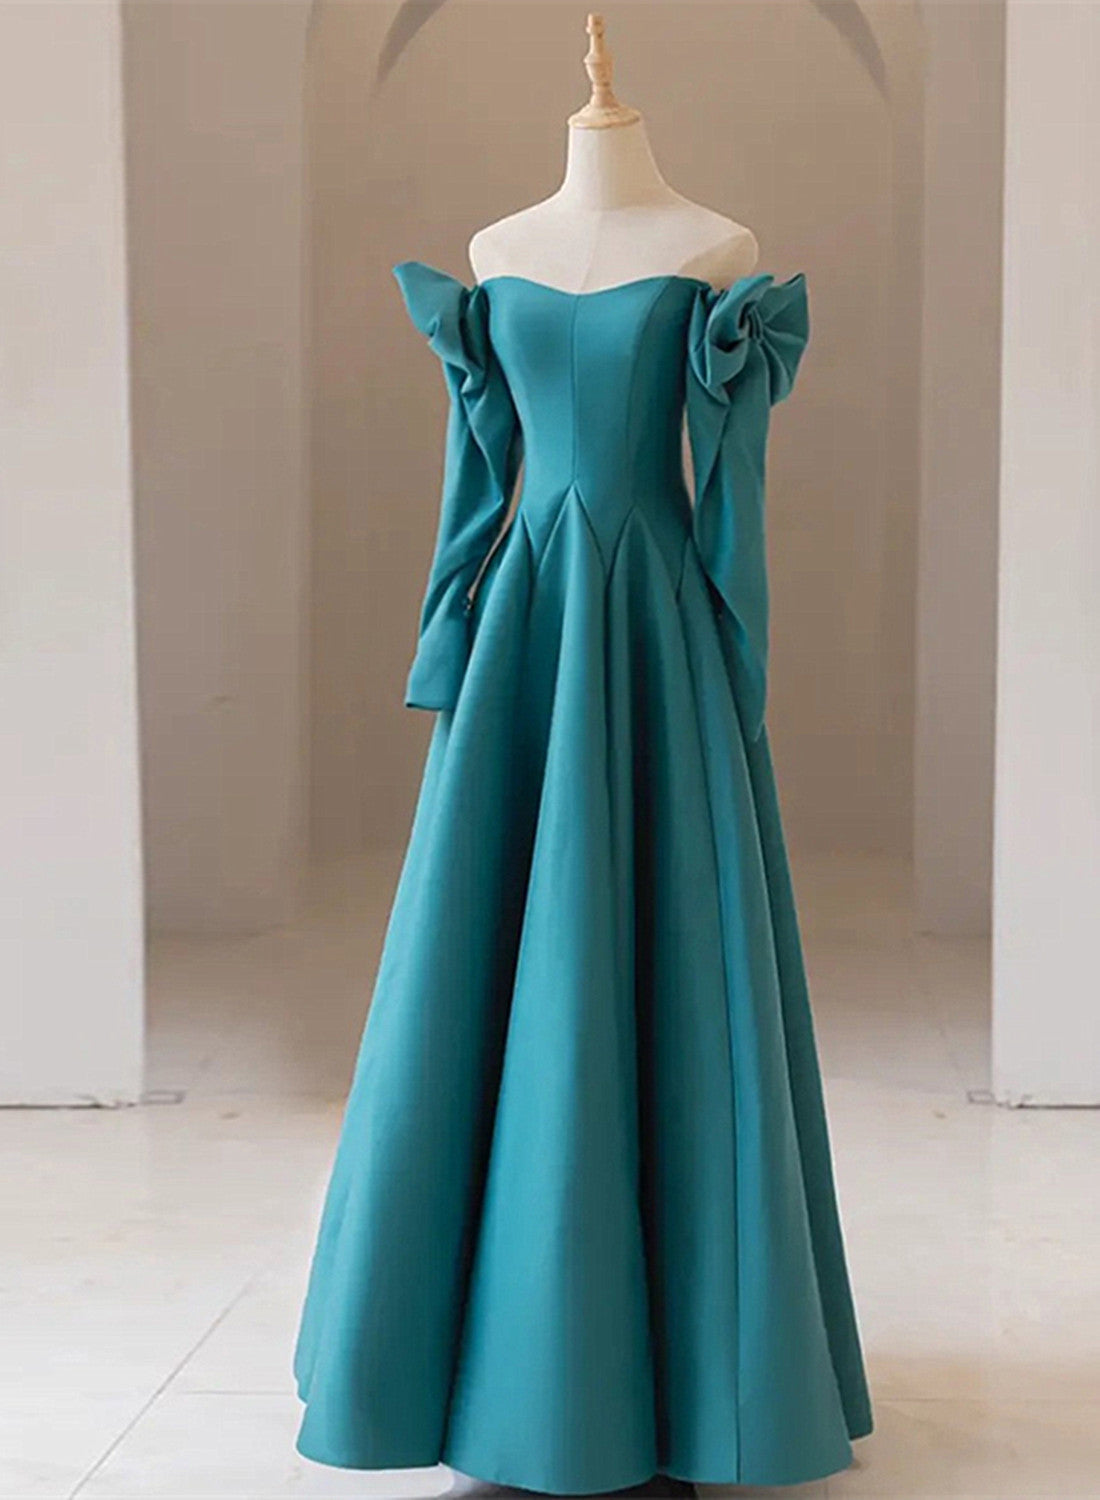 Teal Blue Long Sleeves with Bow A-line Sweetheart Corset Prom Dress, Teal Blue Evening Dress outfit, Formal Dresses Simple